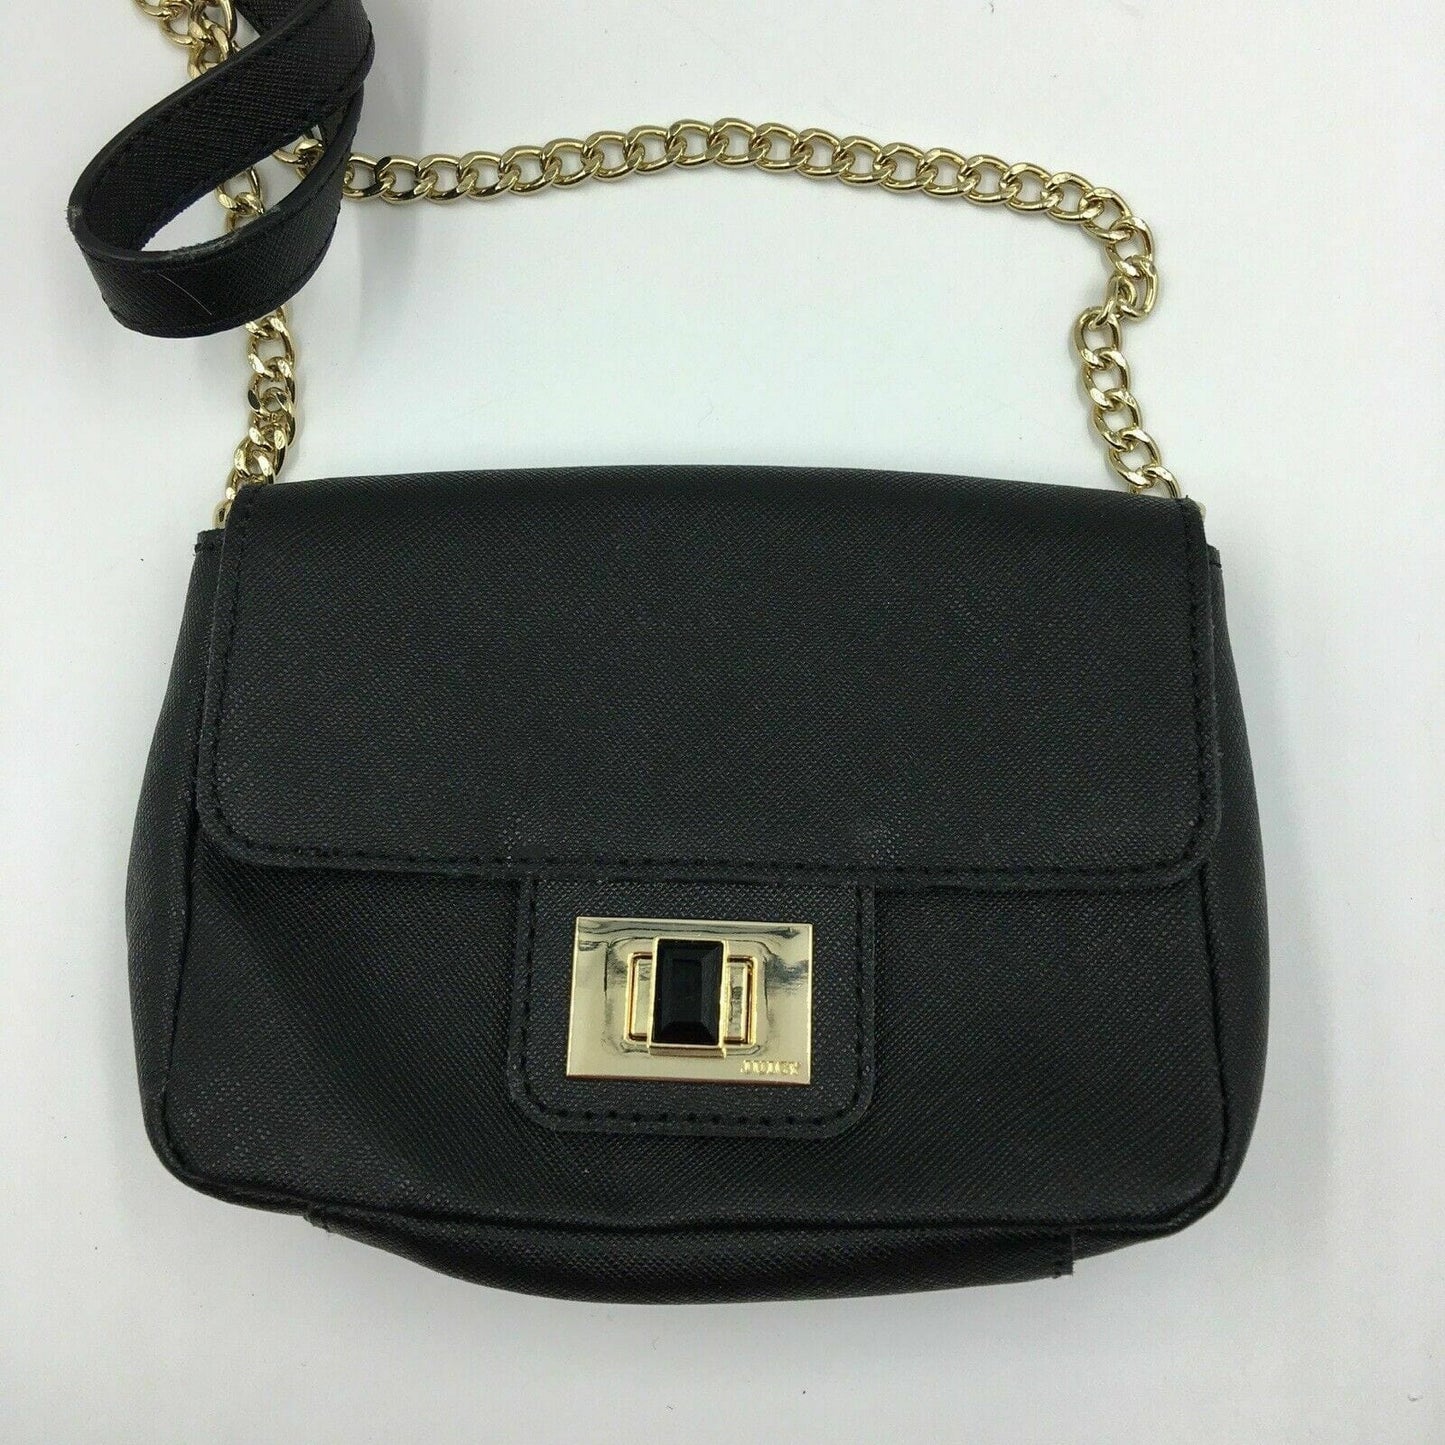 Juicy Couture Black Hatched Leather Bag Purse with Gold Chain Cross Body